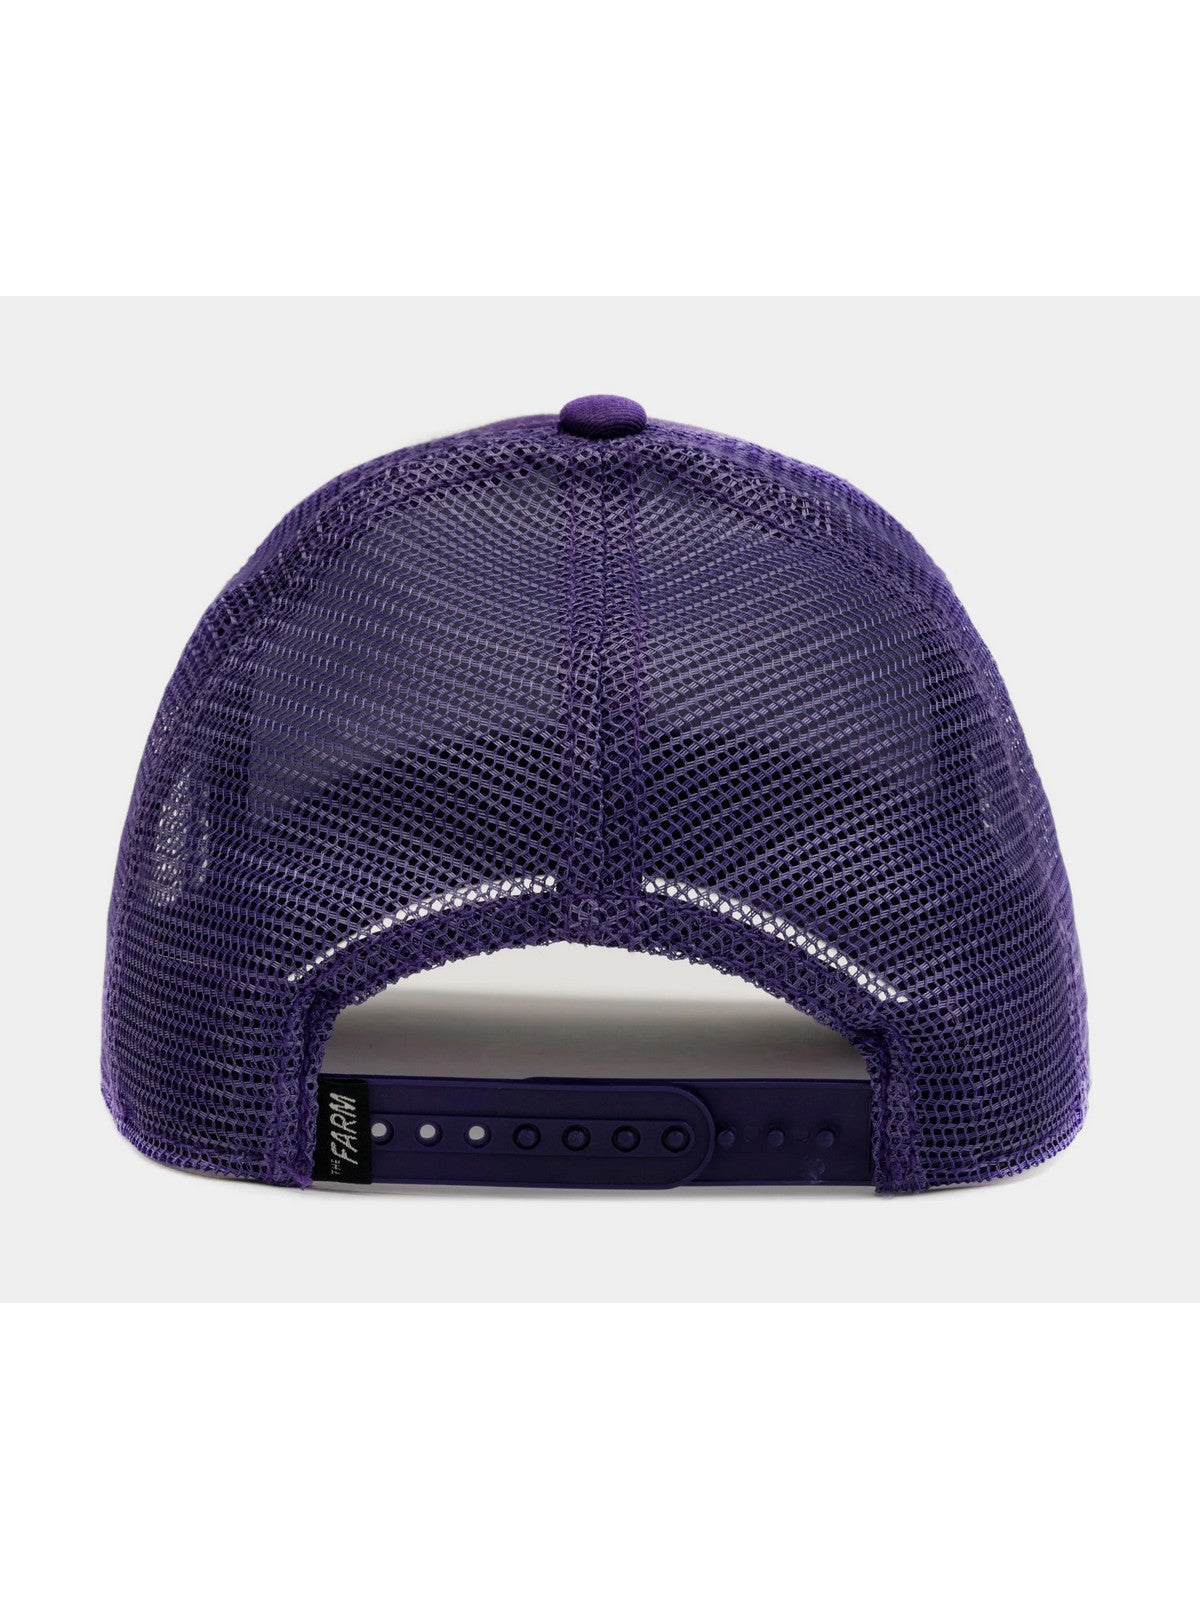 GOORIN BROS Casquette homme The lone wolf 101-0389-PUR Violet